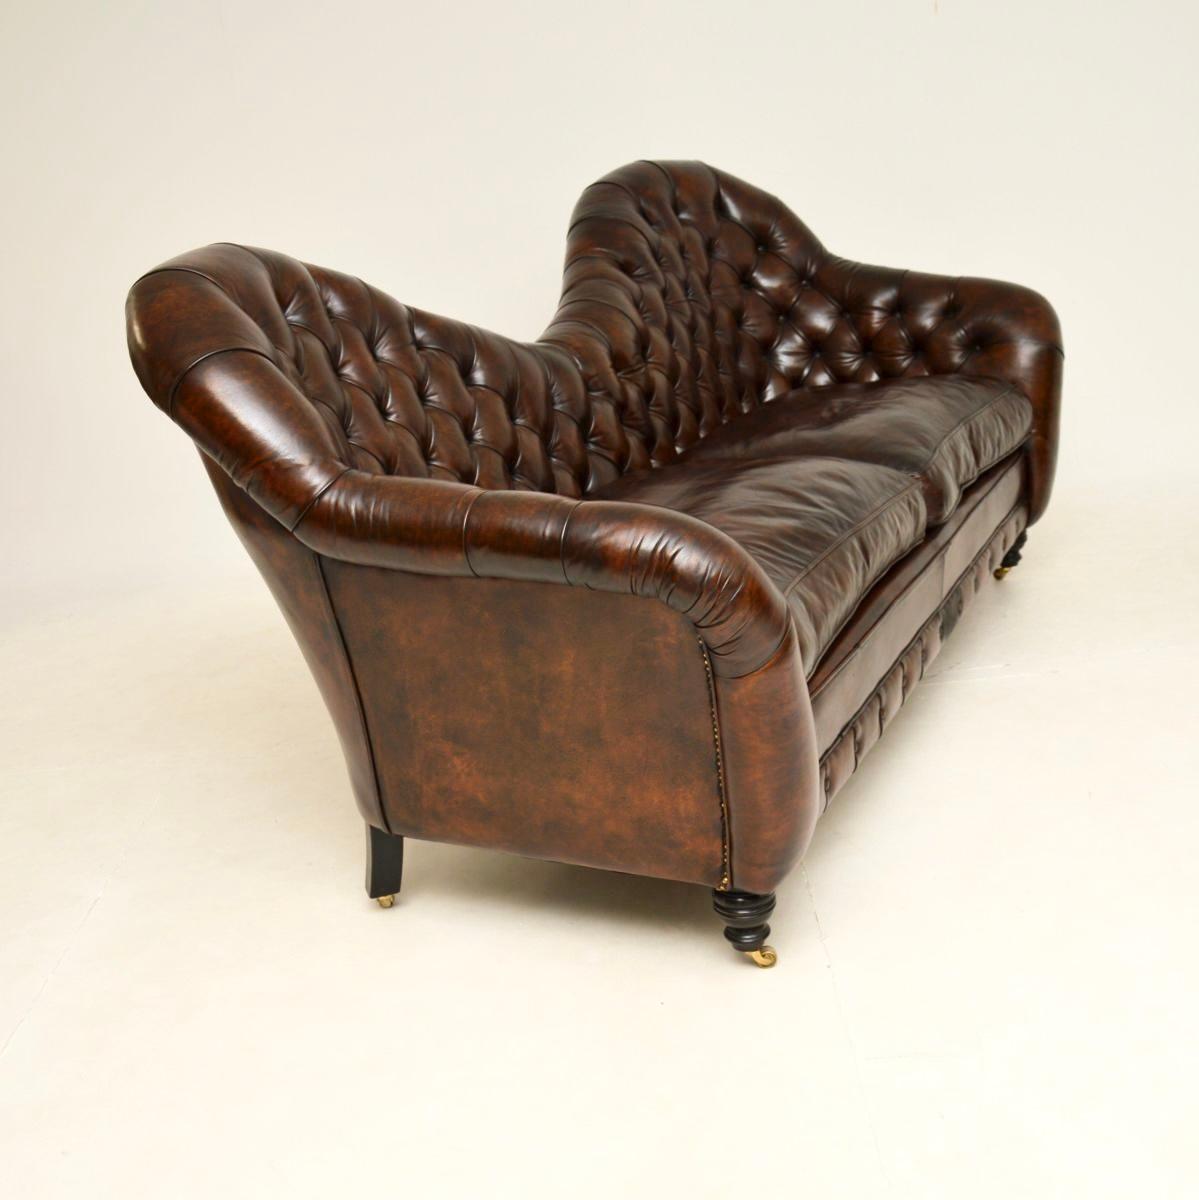 British Antique Leather Chesterfield Style Sofa For Sale